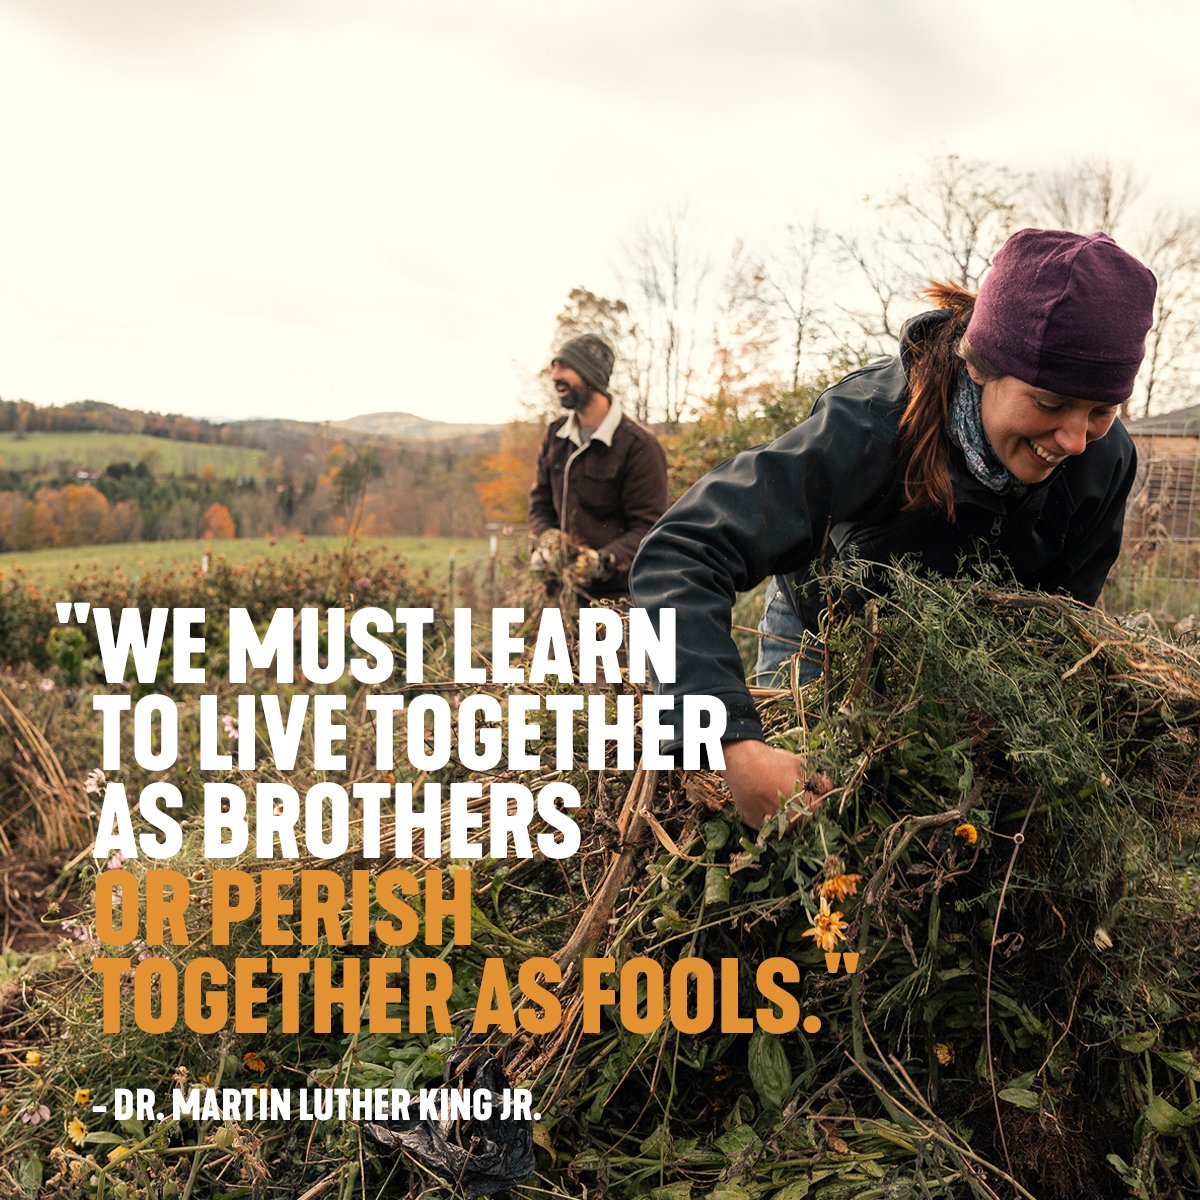 We must learn to live together as brothers or perish together as fools. - Dr. Martin Luther King Jr.